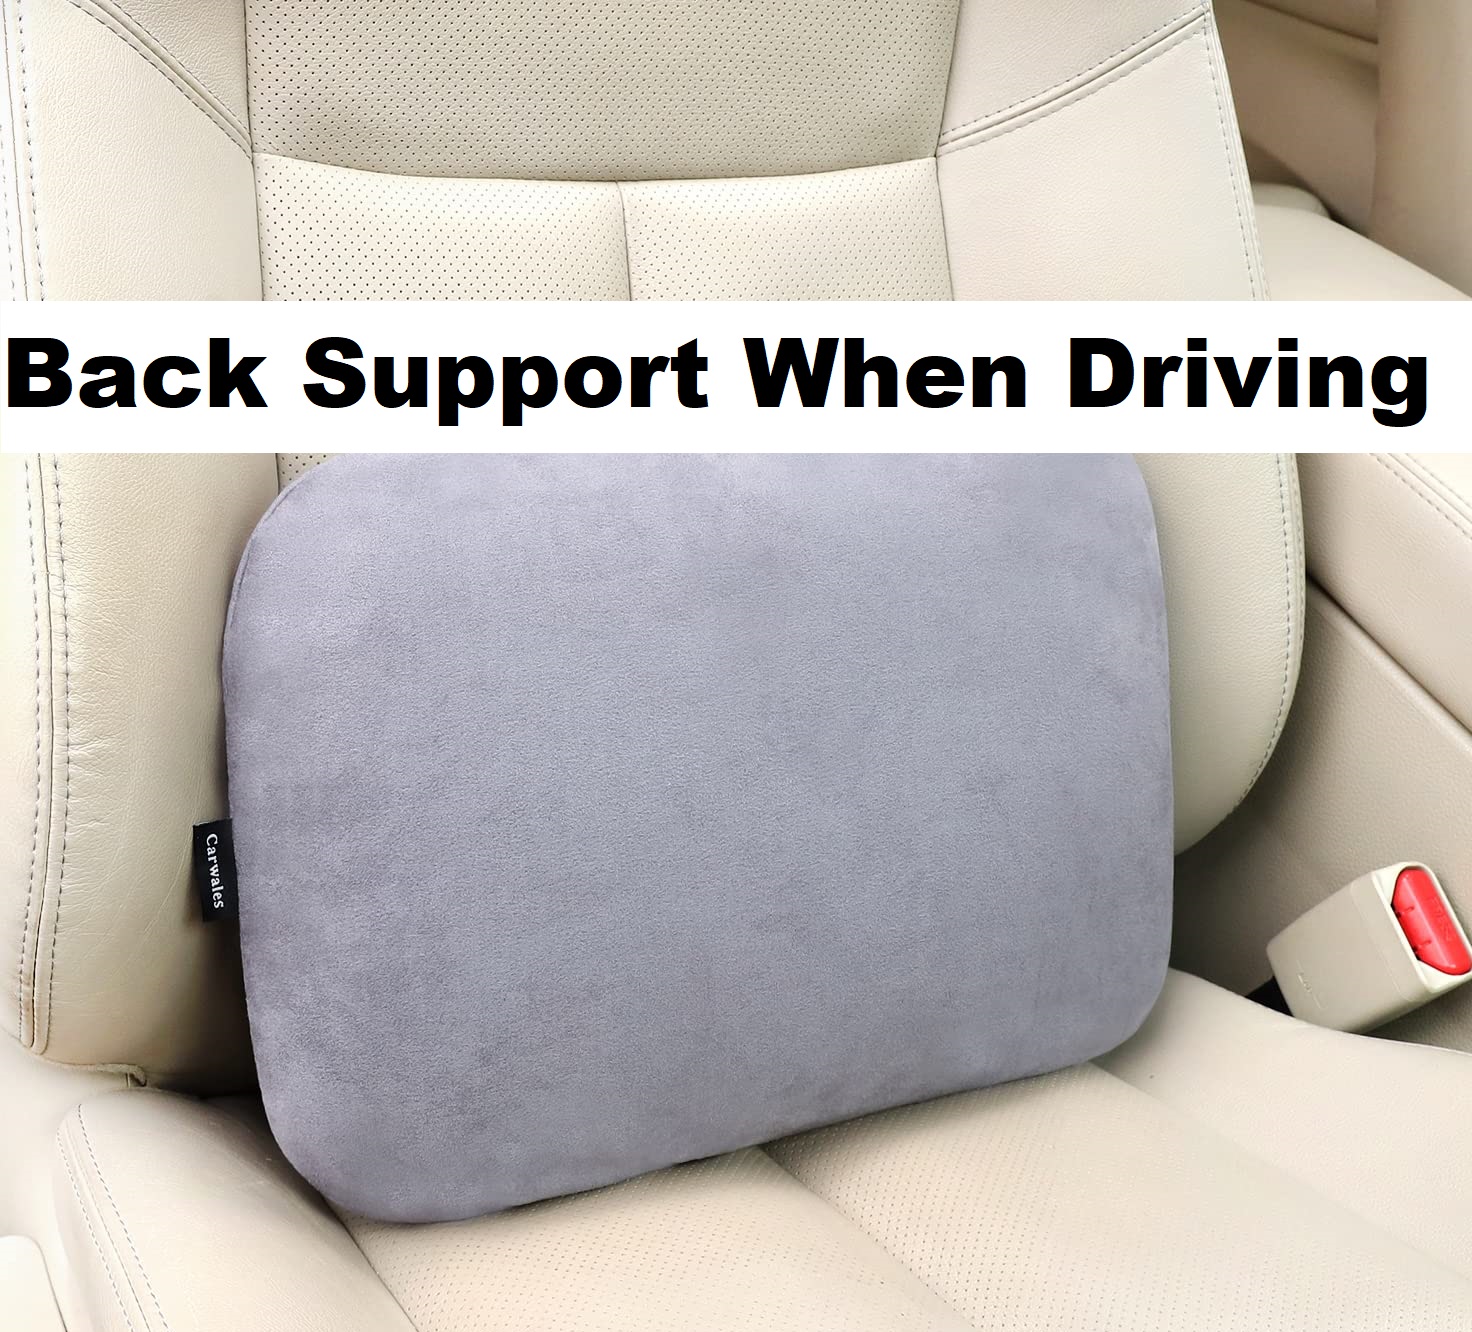 Back Support When Driving